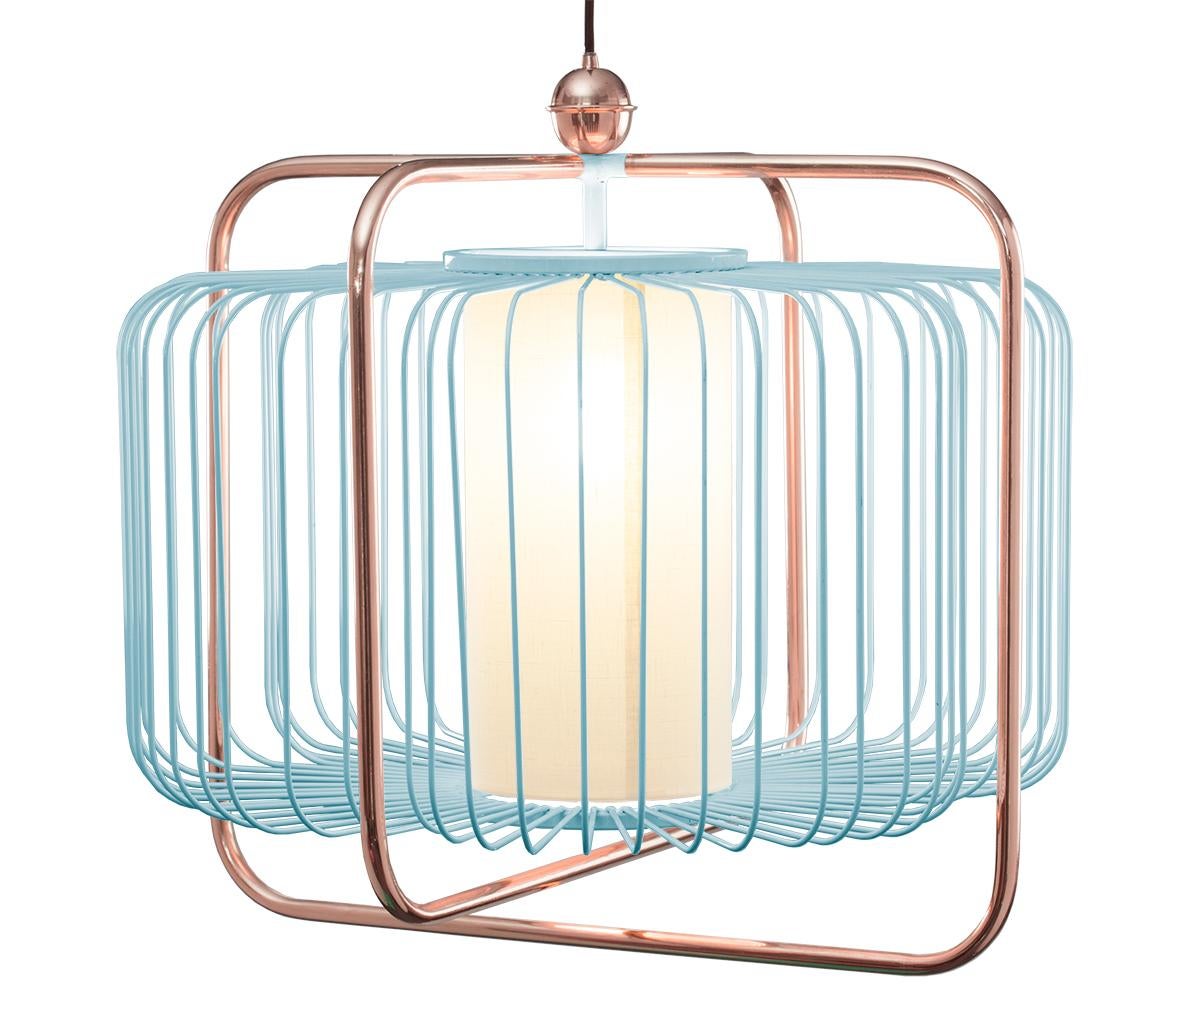 Contemporary Art Deco inspired Jules I Pendant Lamp in Copper and Cobalt Blue For Sale 3